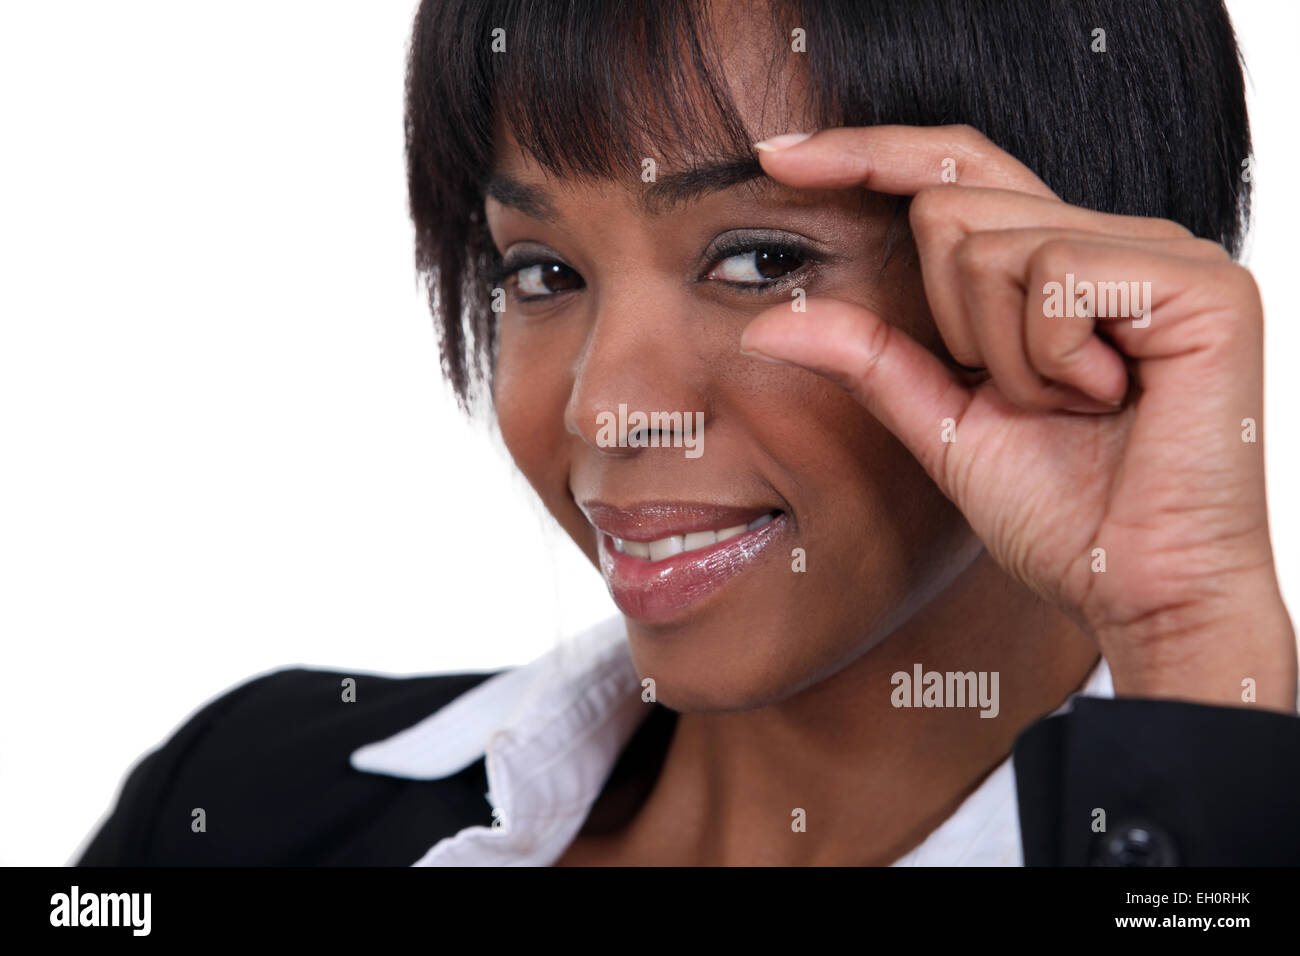 Portrait of a woman looking out of the corner of her eye Stock Photo